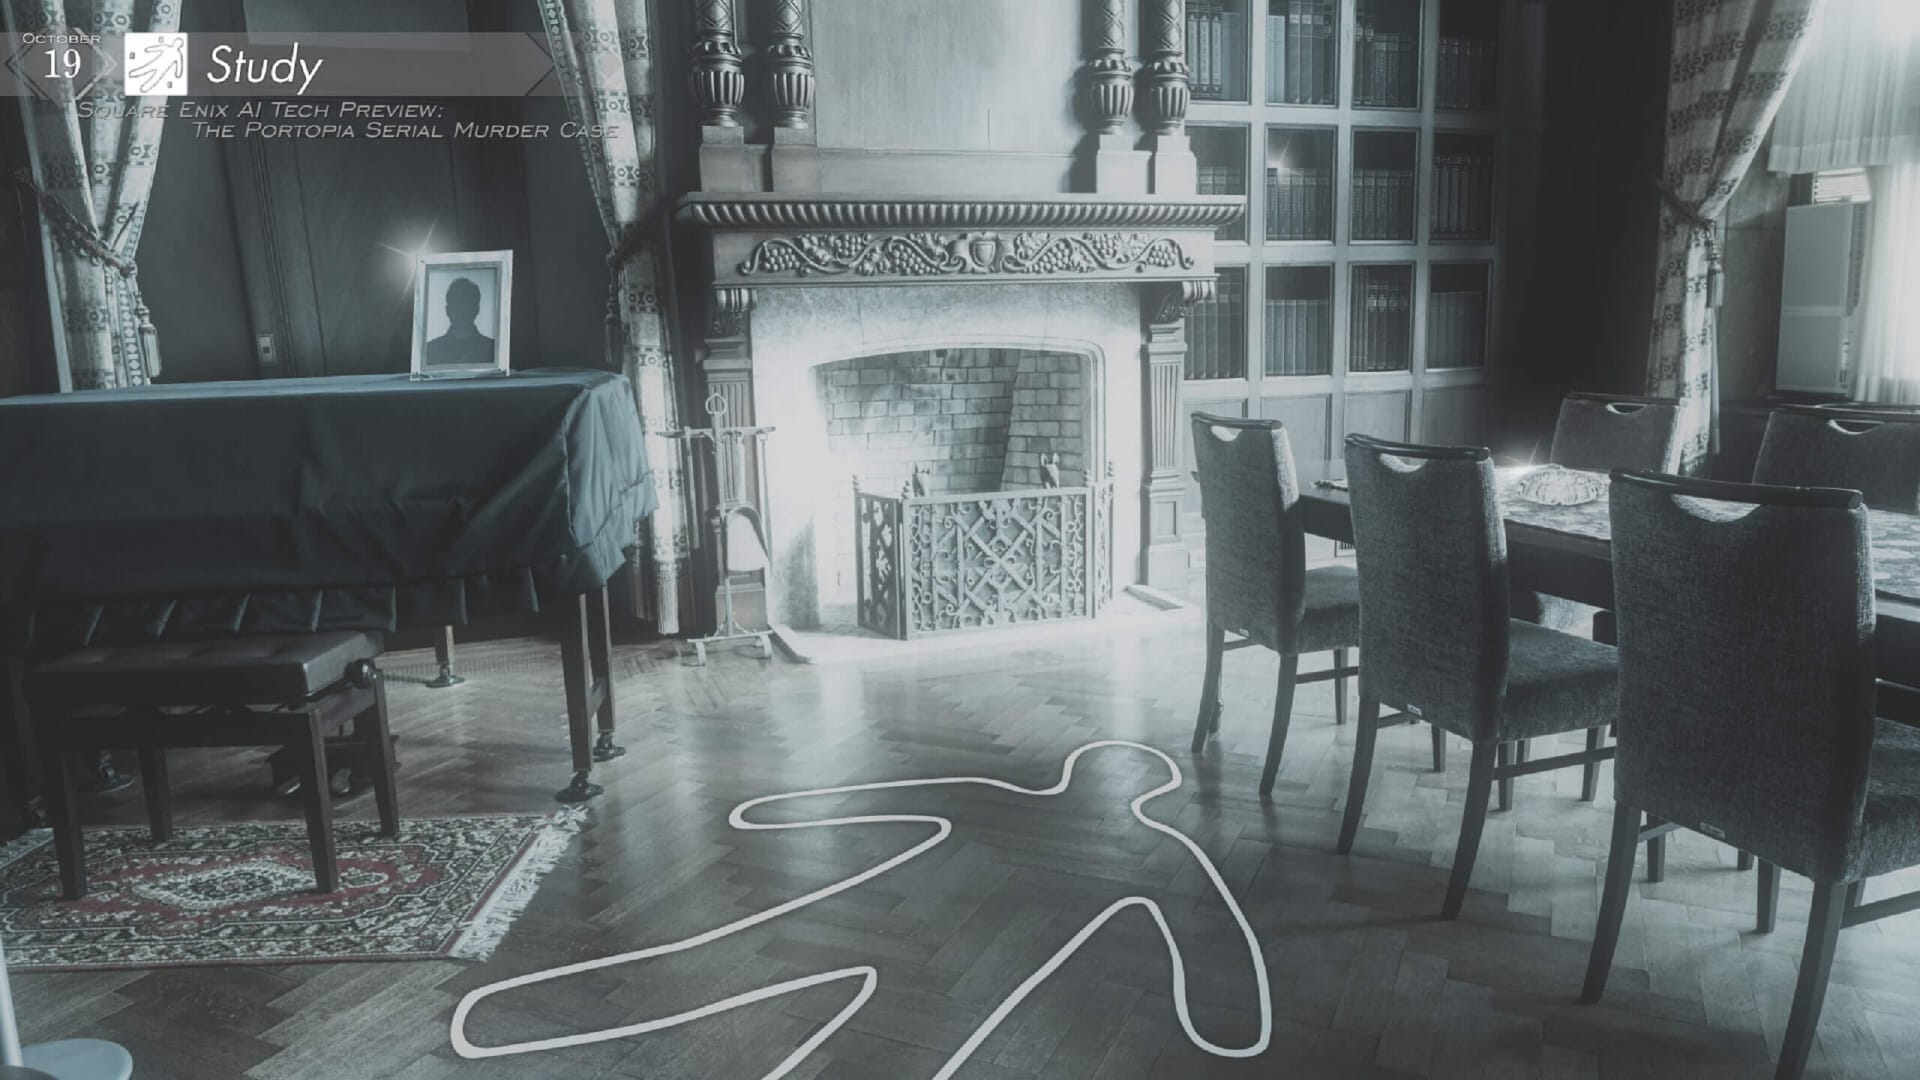 A crime scene in Portopia Serial Murder Case where the player is studying what is going on with the former location of a corpse in an old styled living room outlined in white tape